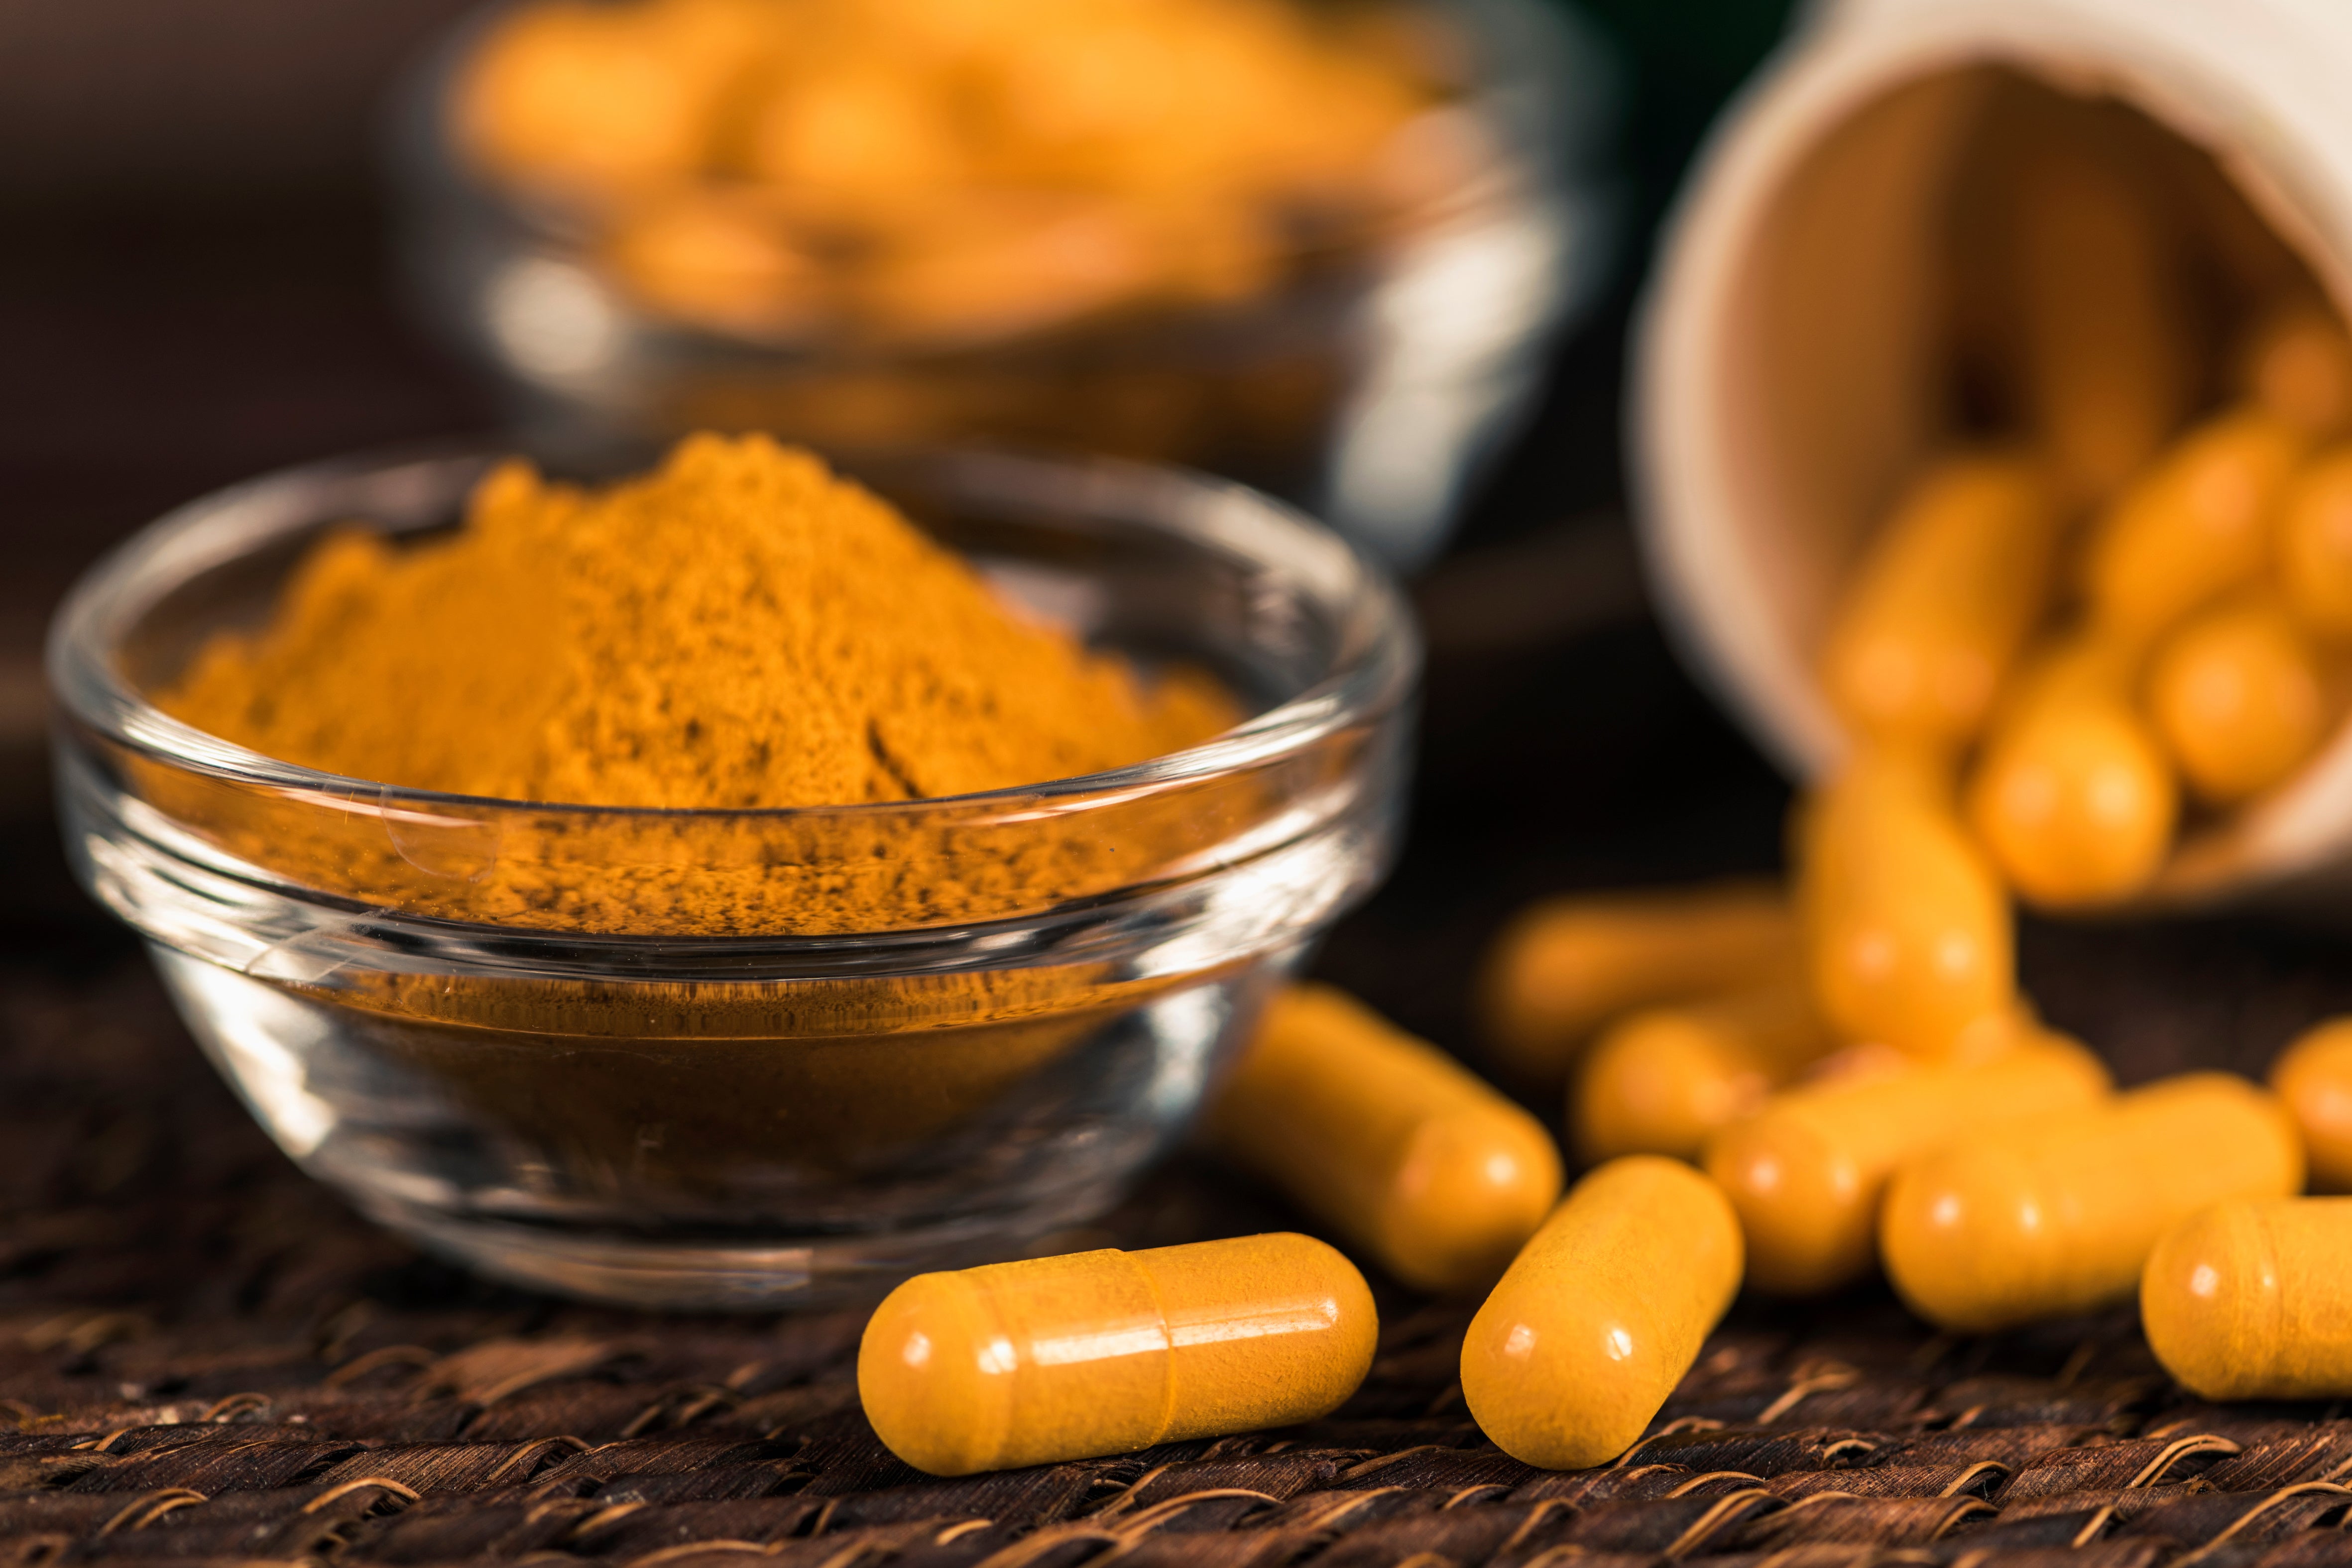 Should You Take Turmeric Supplements?